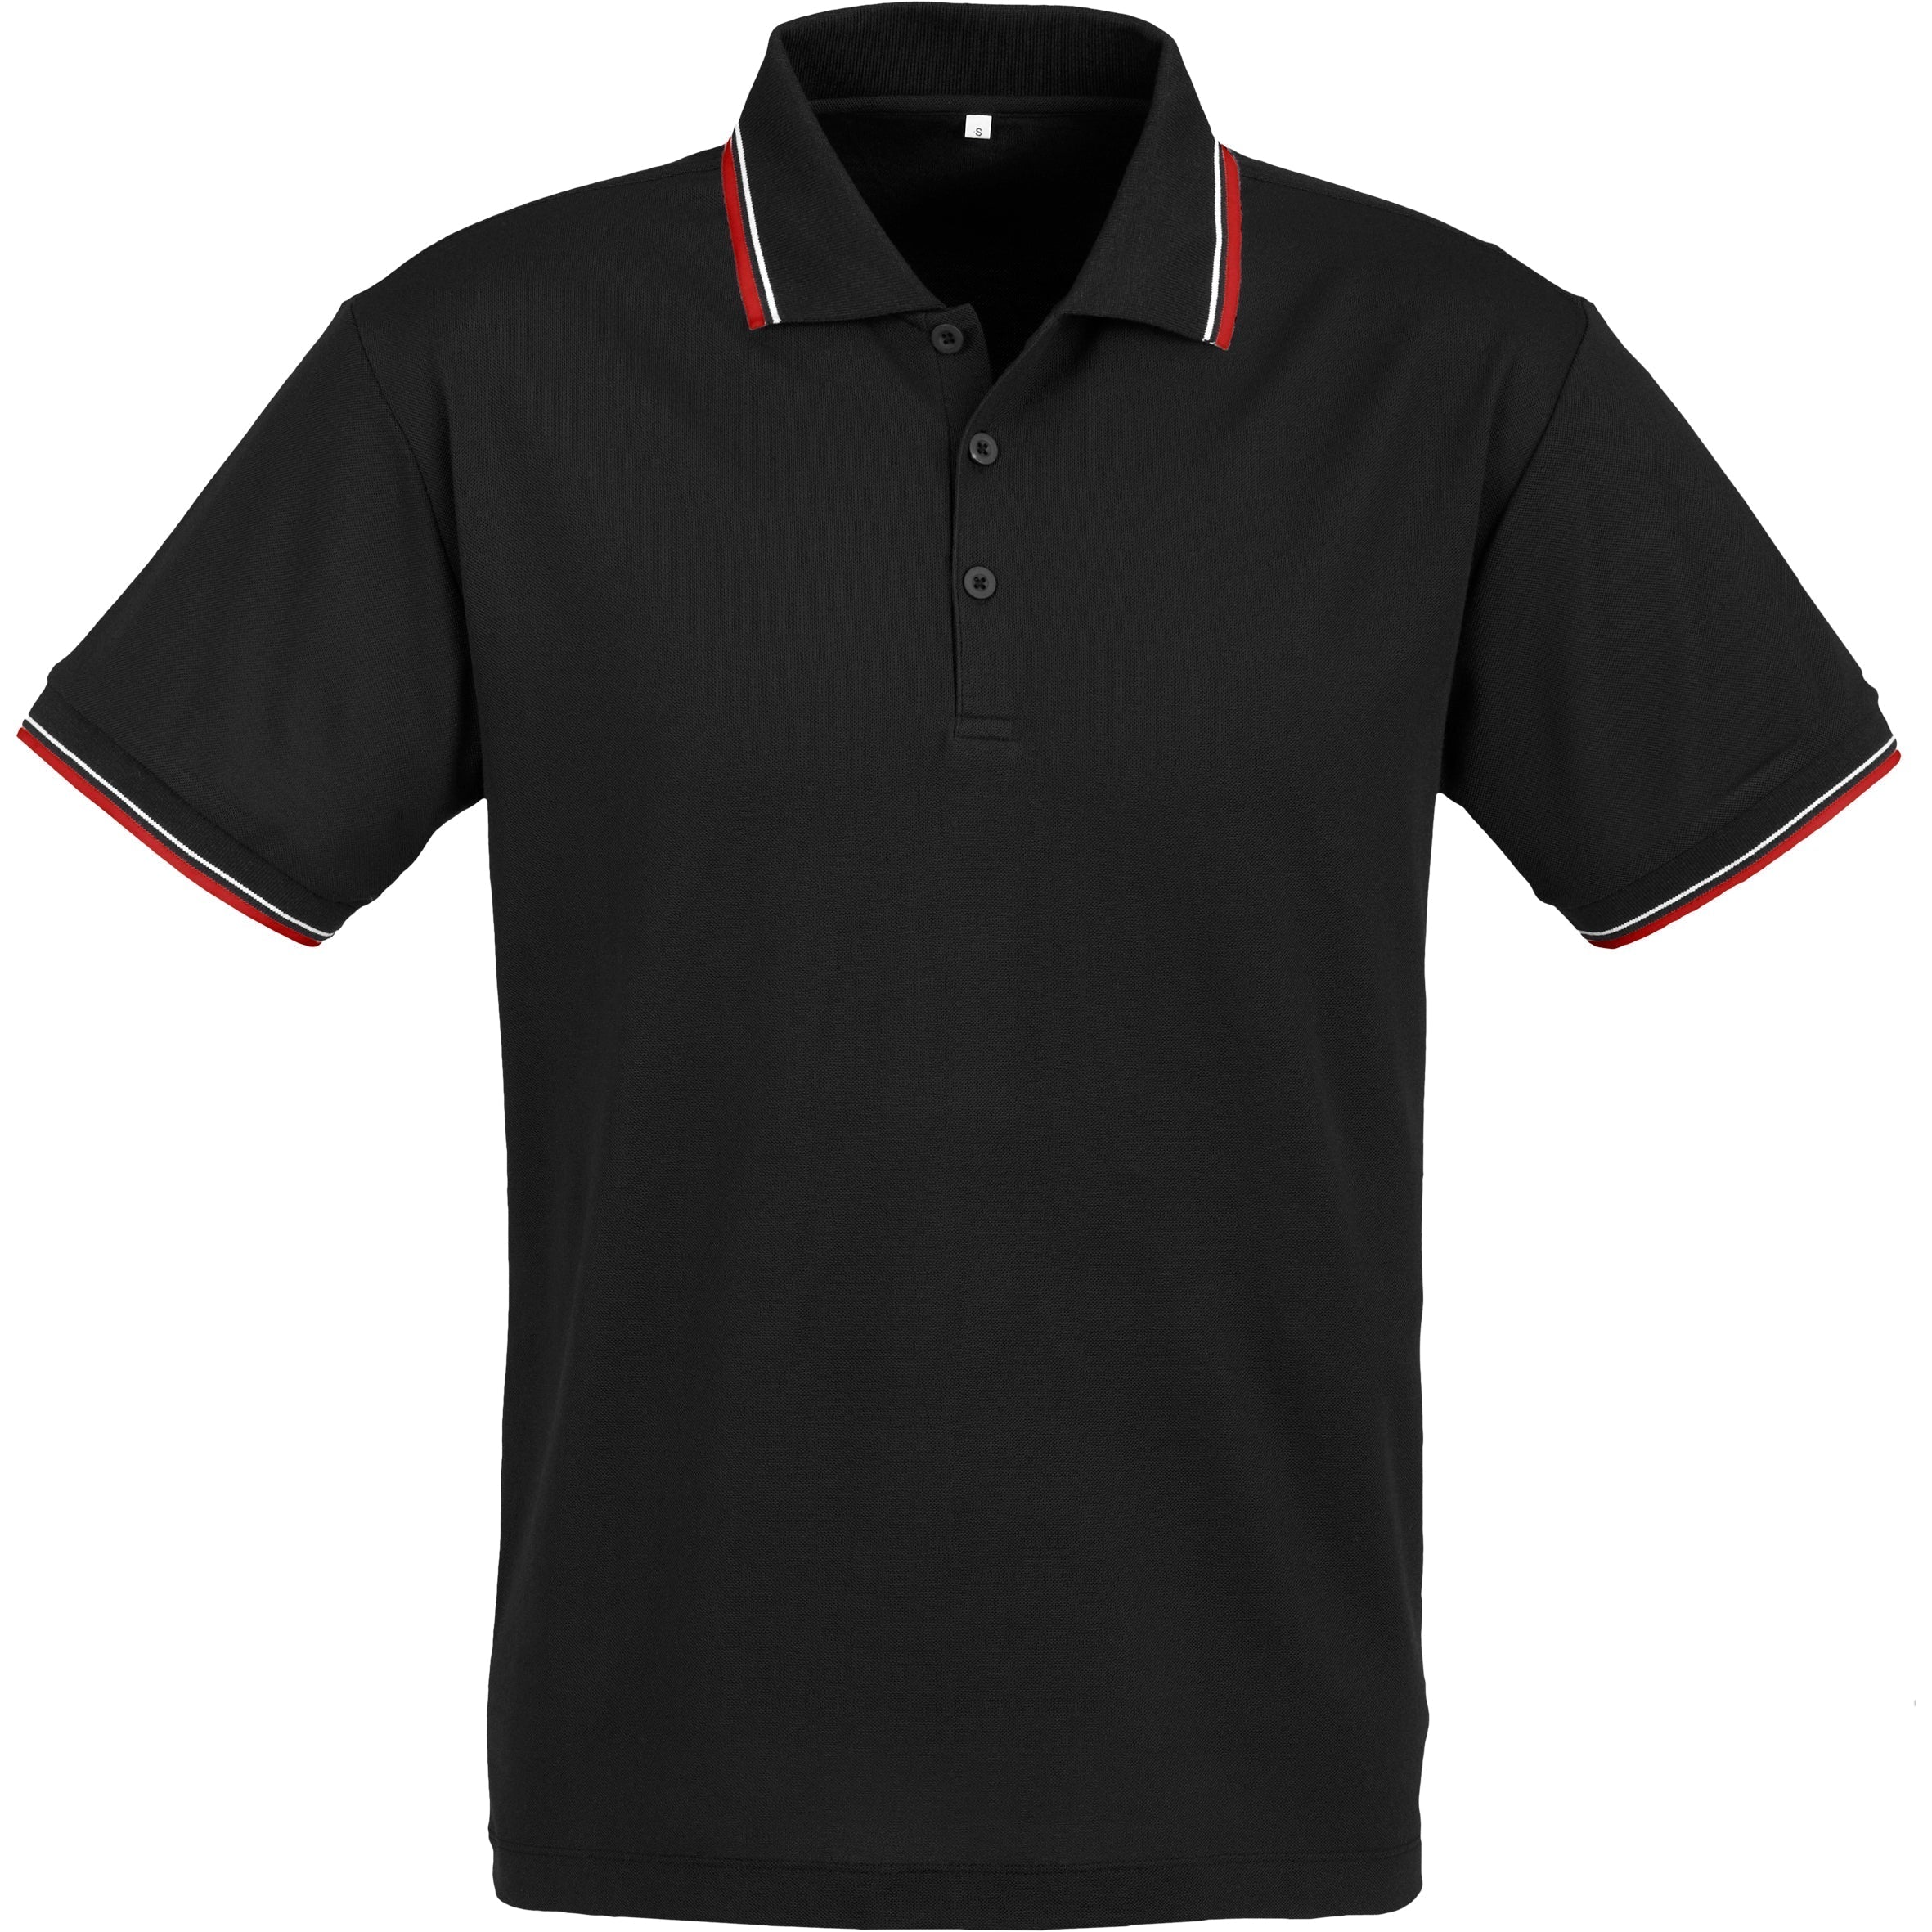 Mens Cambridge Golf Shirt - Black Red Only-L-Black With Red-BLR